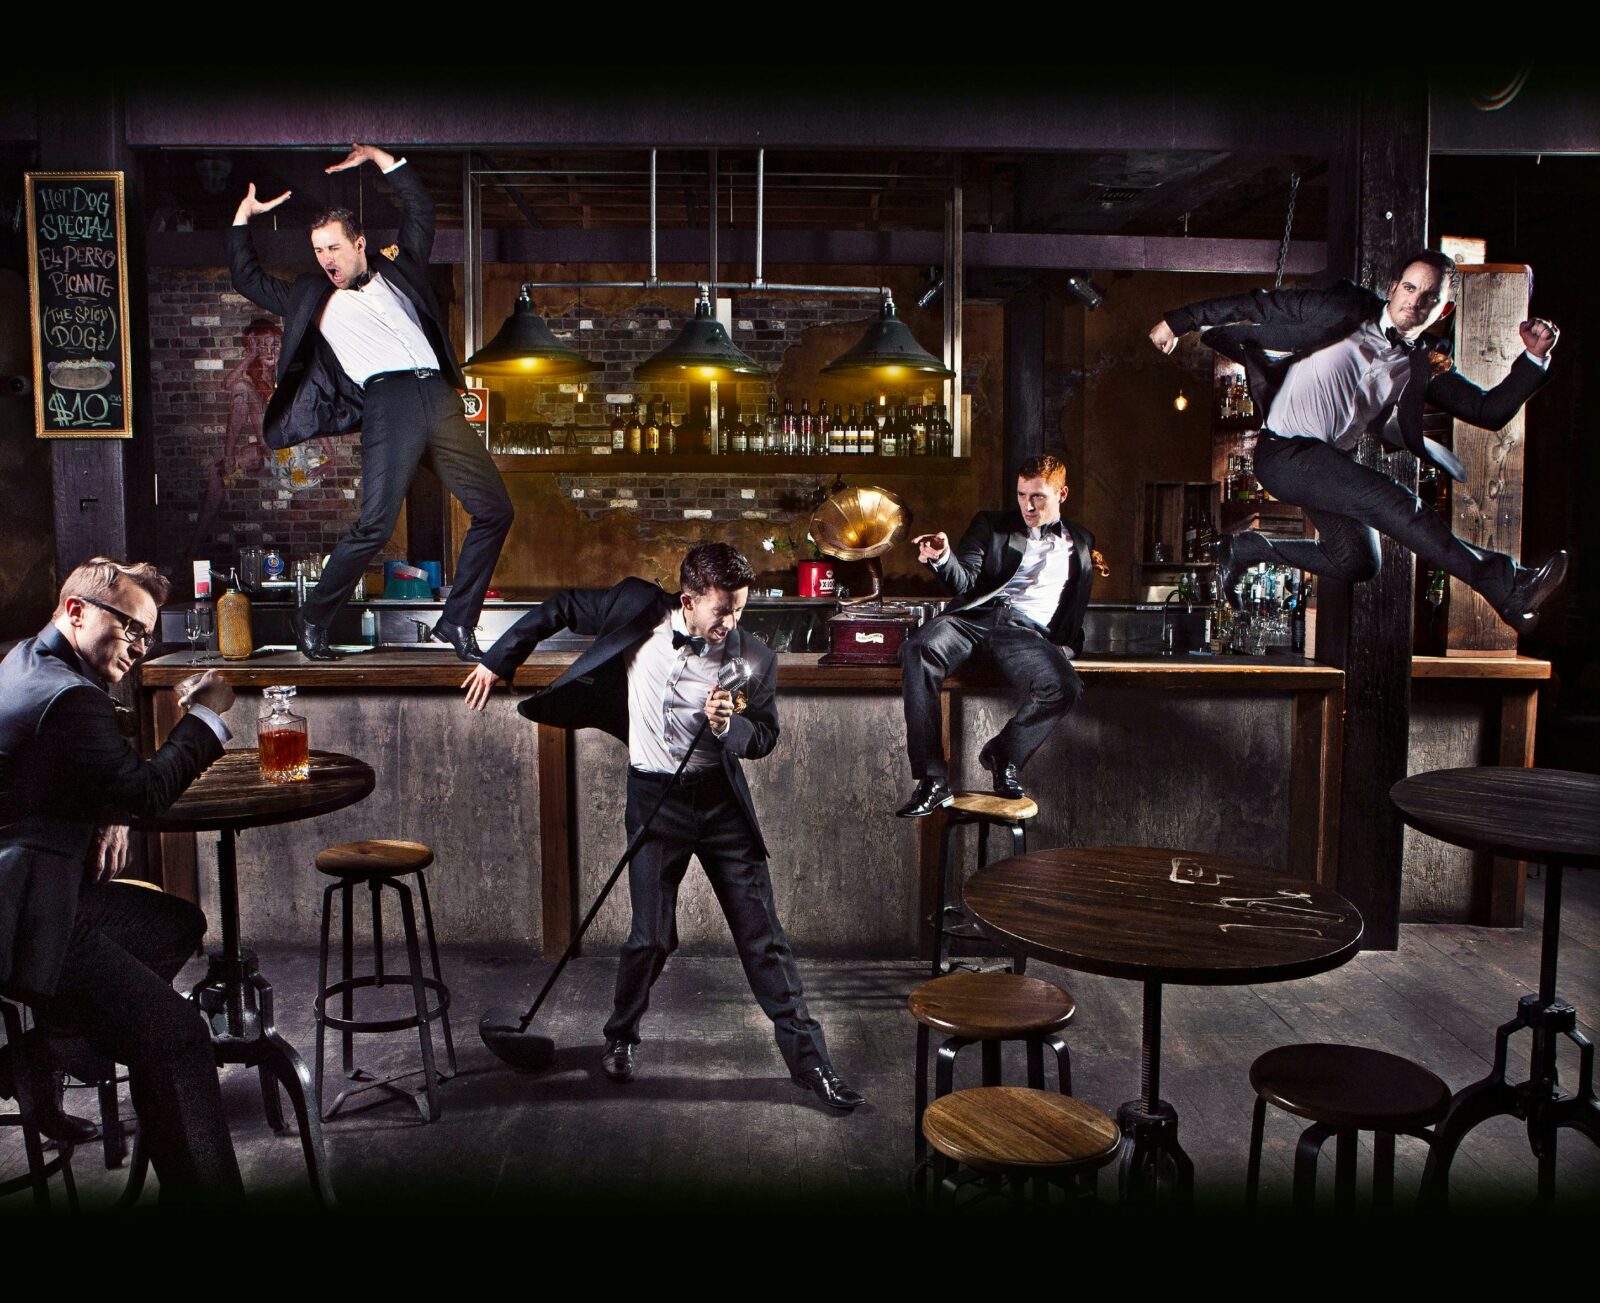 A group of dancers in tuxedos are in various positions in a bar